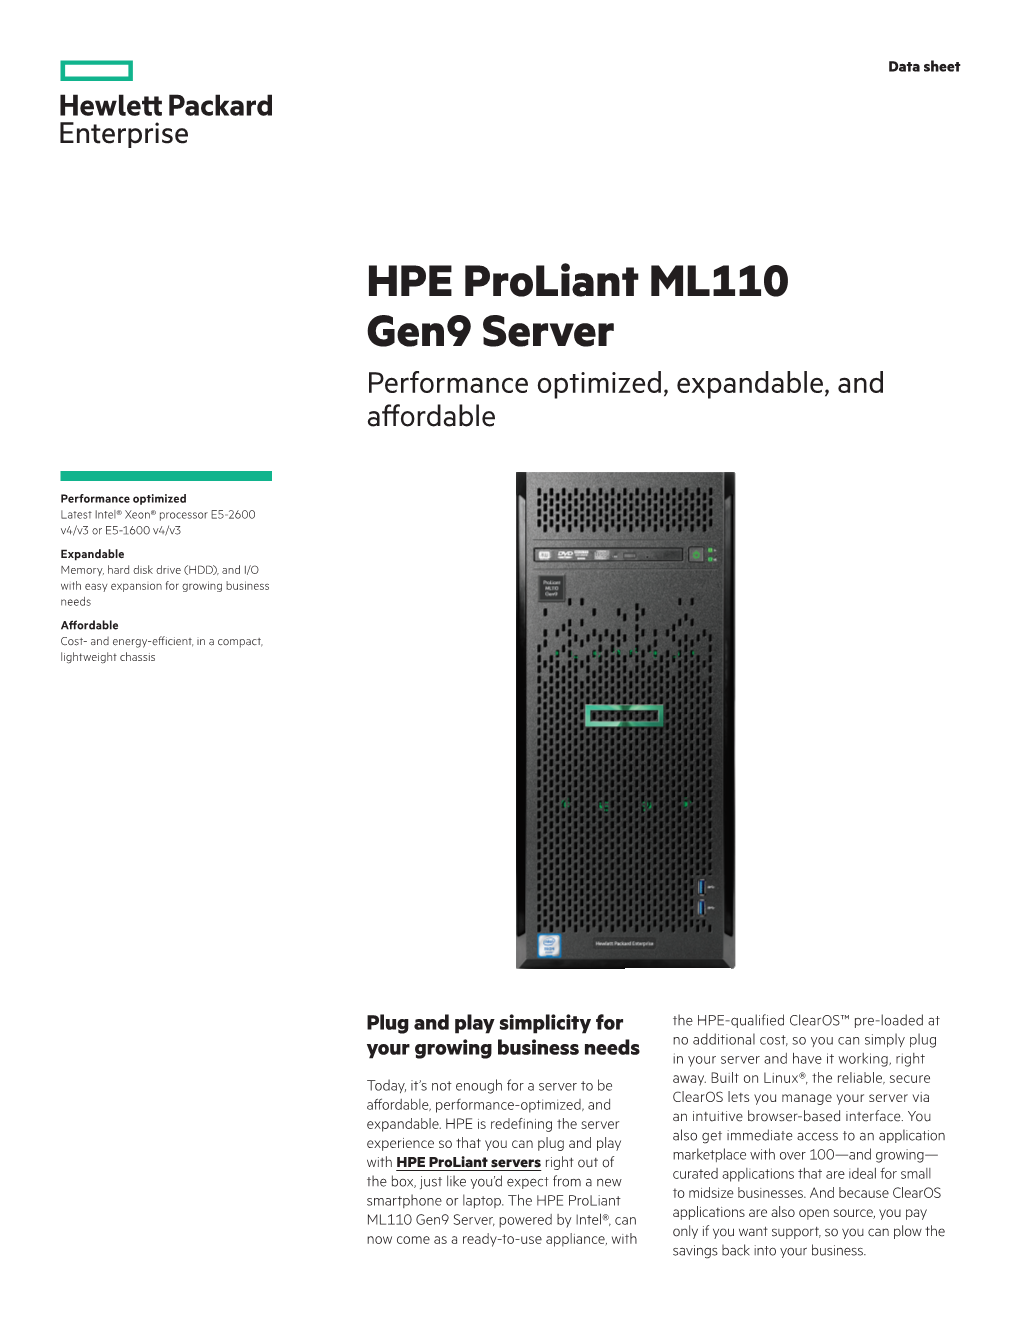 HPE Proliant ML110 Gen9 Server with Clearos for Smbs Data Sheet